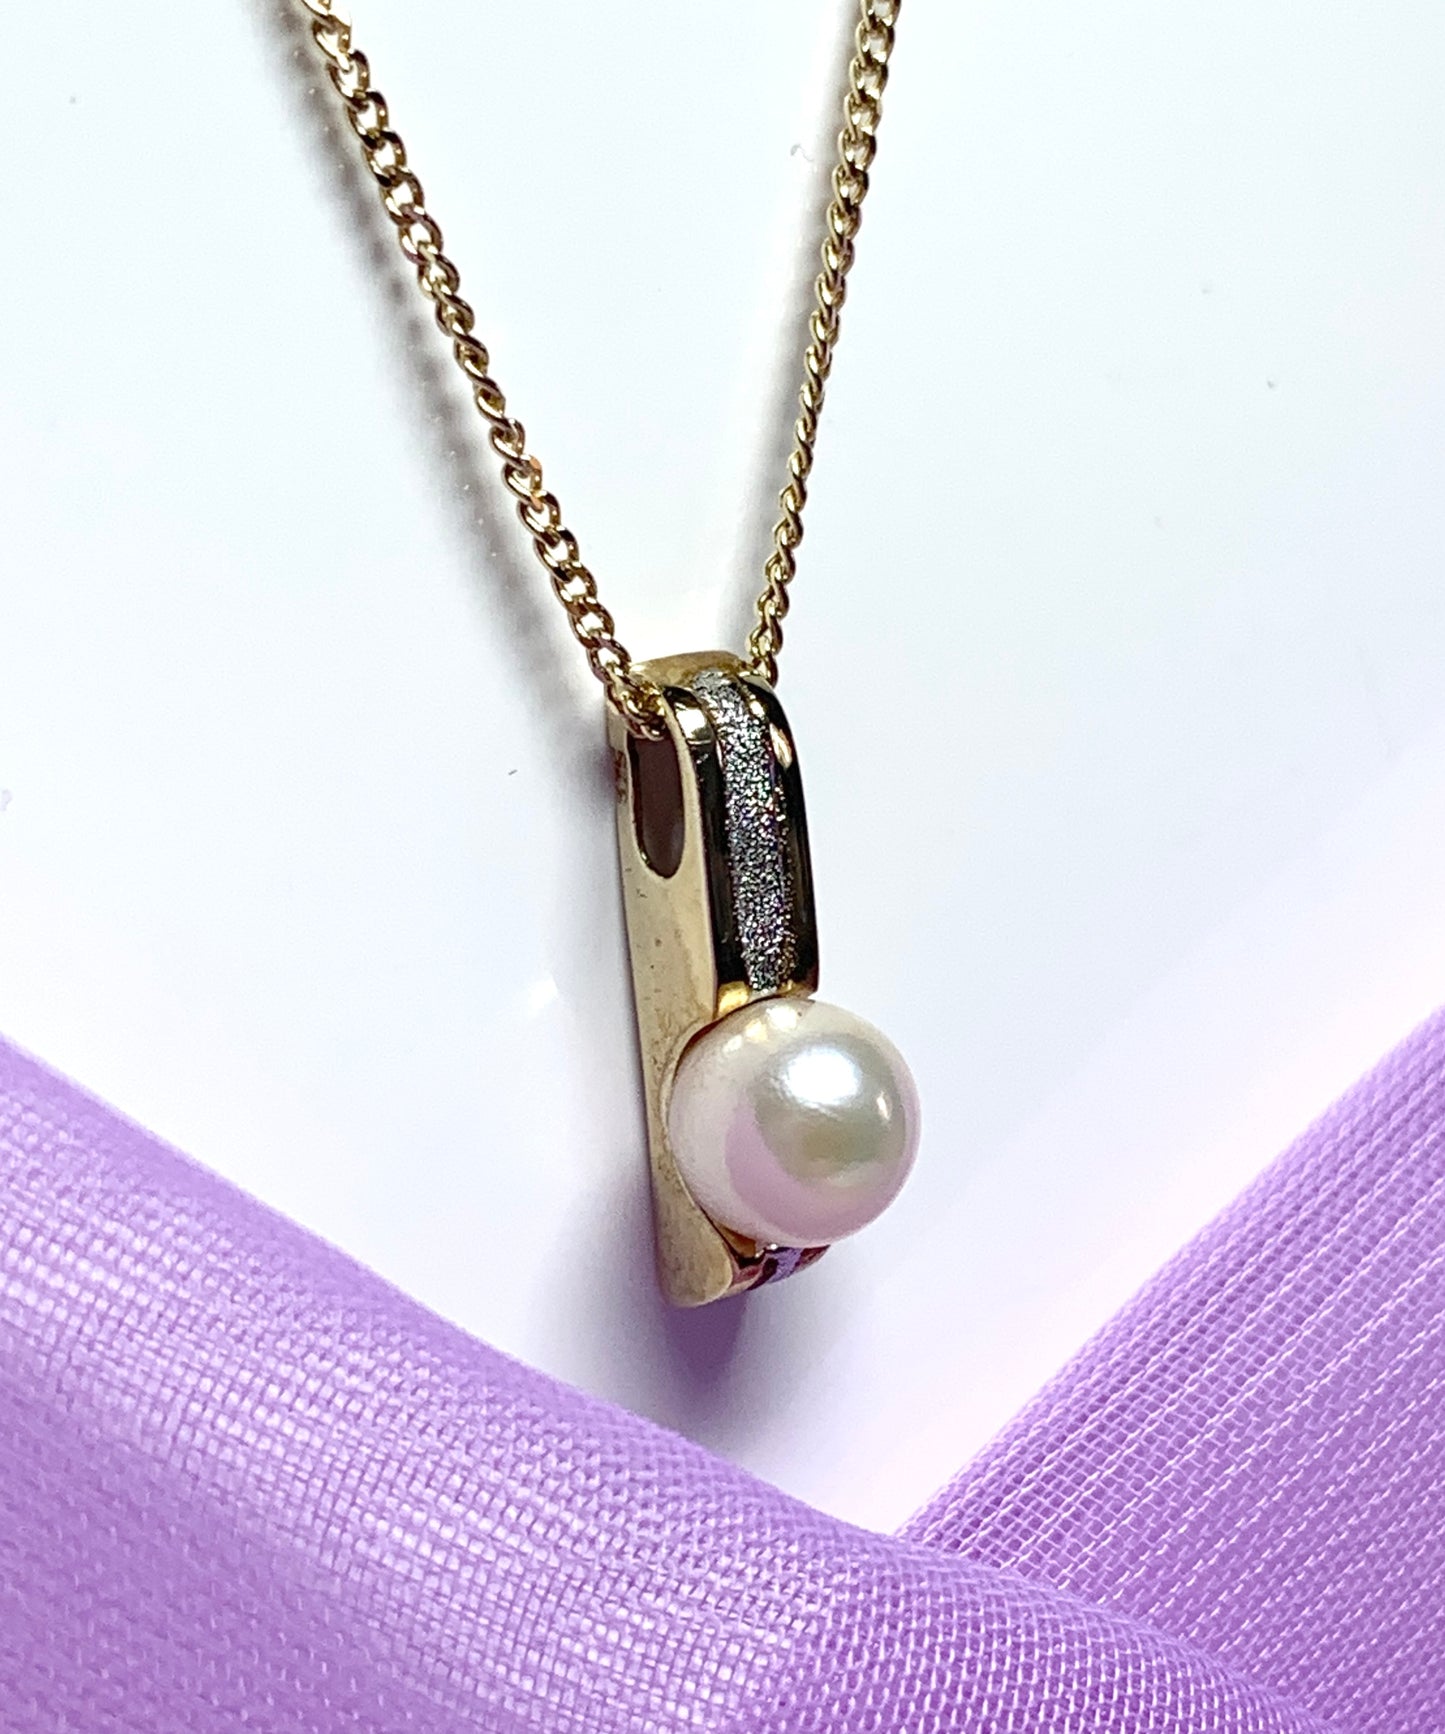 Pearl necklace two tone gold pedant